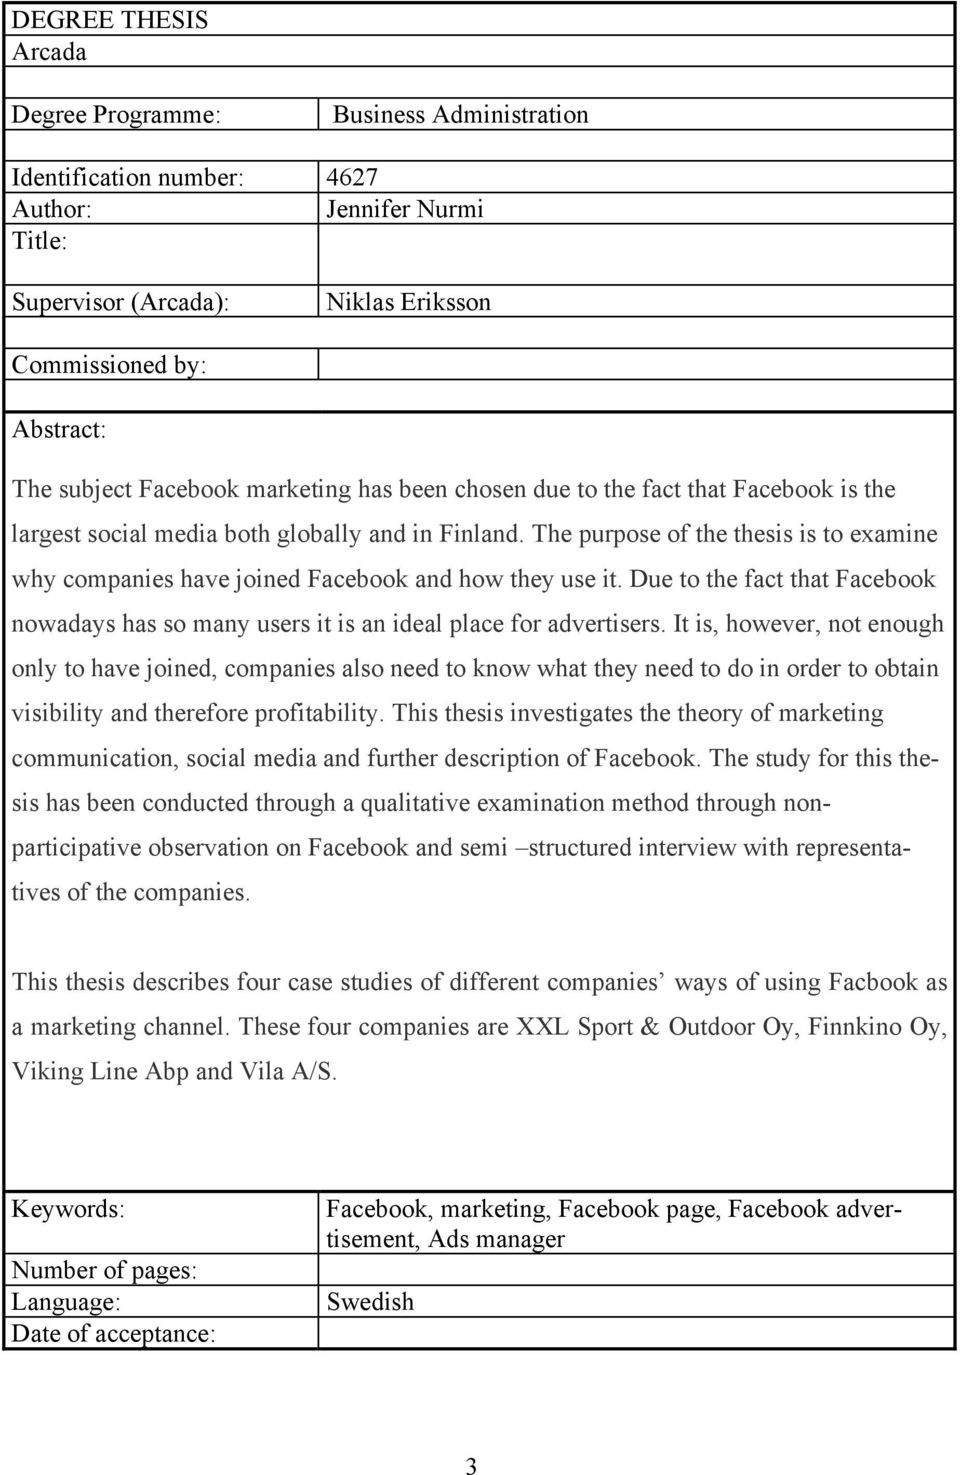 The purpose of the thesis is to examine why companies have joined Facebook and how they use it. Due to the fact that Facebook nowadays has so many users it is an ideal place for advertisers.